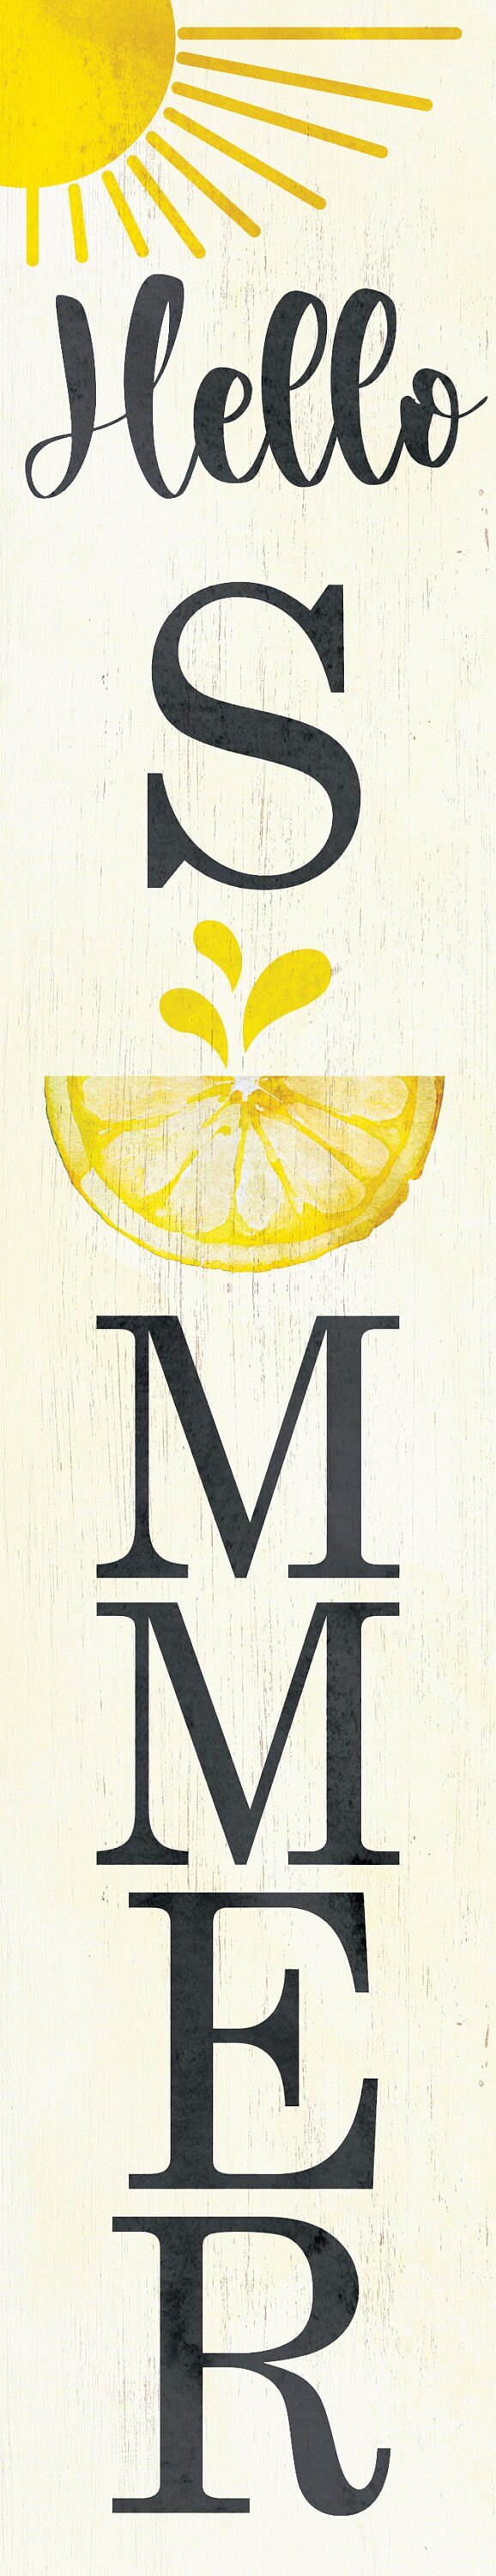 48in "Hello Summer" with Lemon Pattern Wooden Porch Sign - Perfect for Front Porch Decor and Outdoor Parties